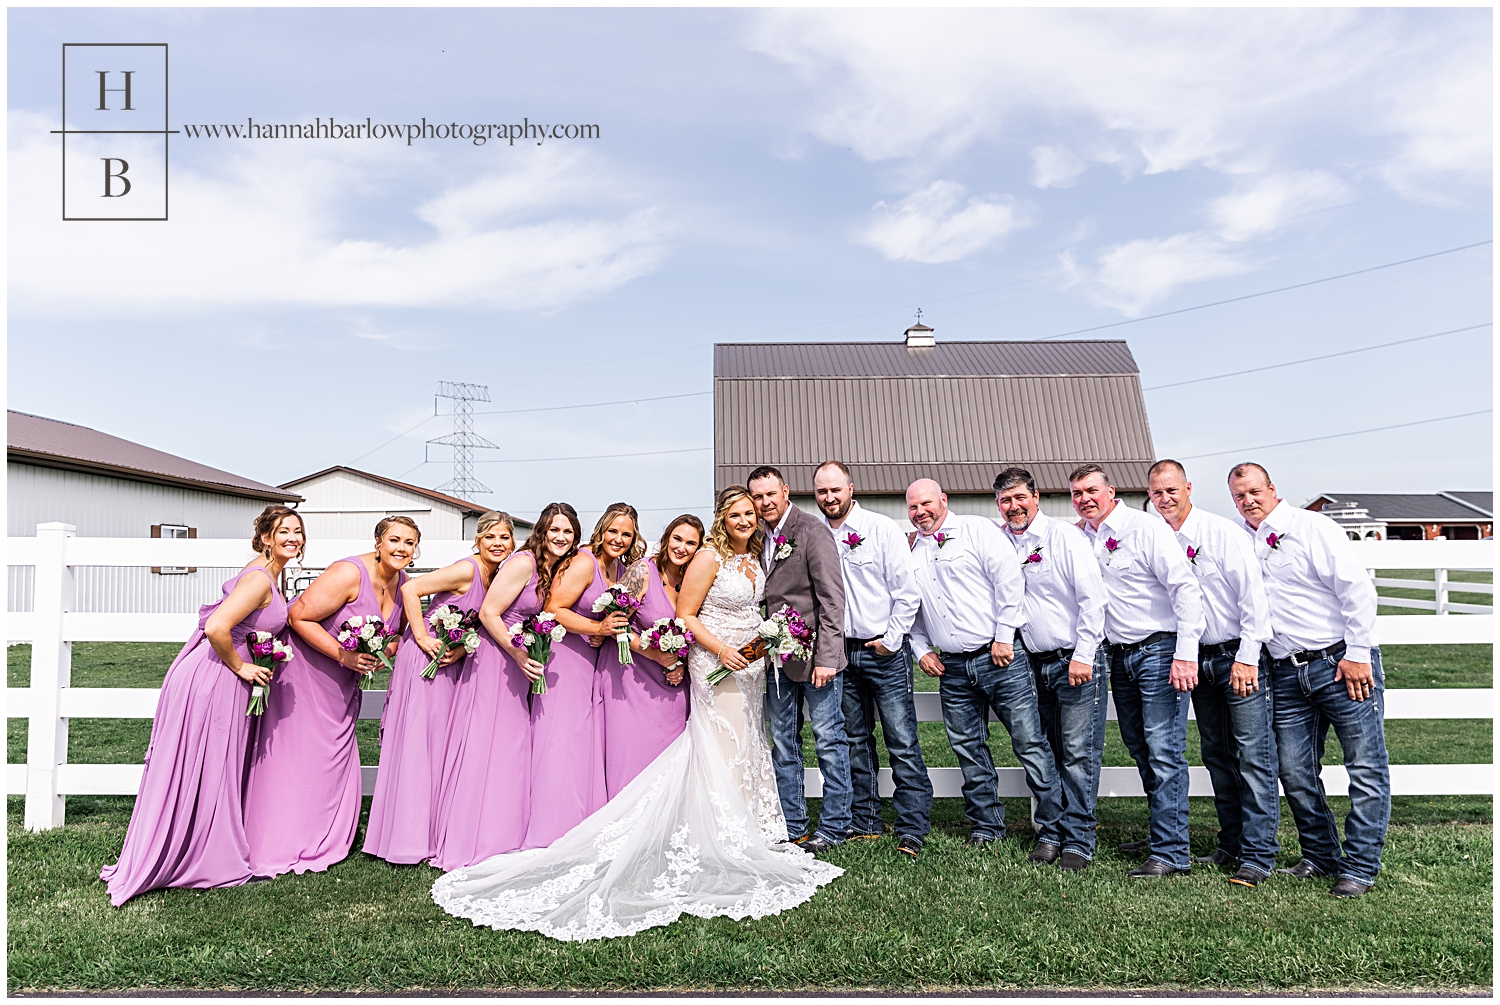 Full bridal party poses and hugs in on couple with purple dresses and men in jeans.